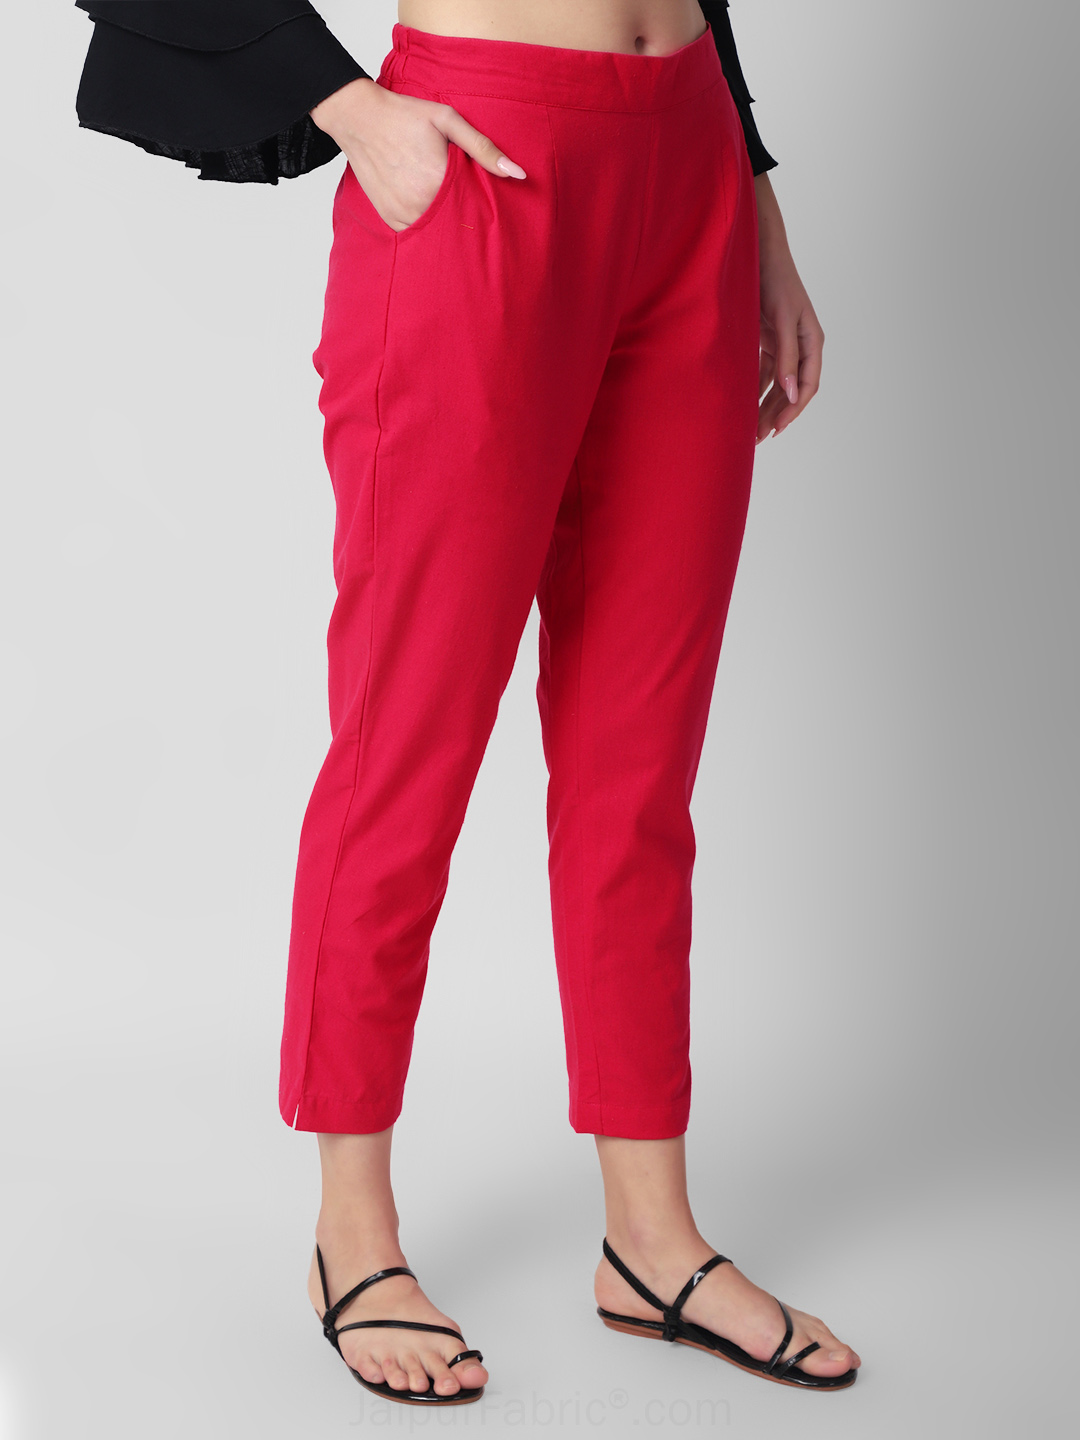 Bubblegum Breeze Women Cotton Pants casual and semi formal daily trousers